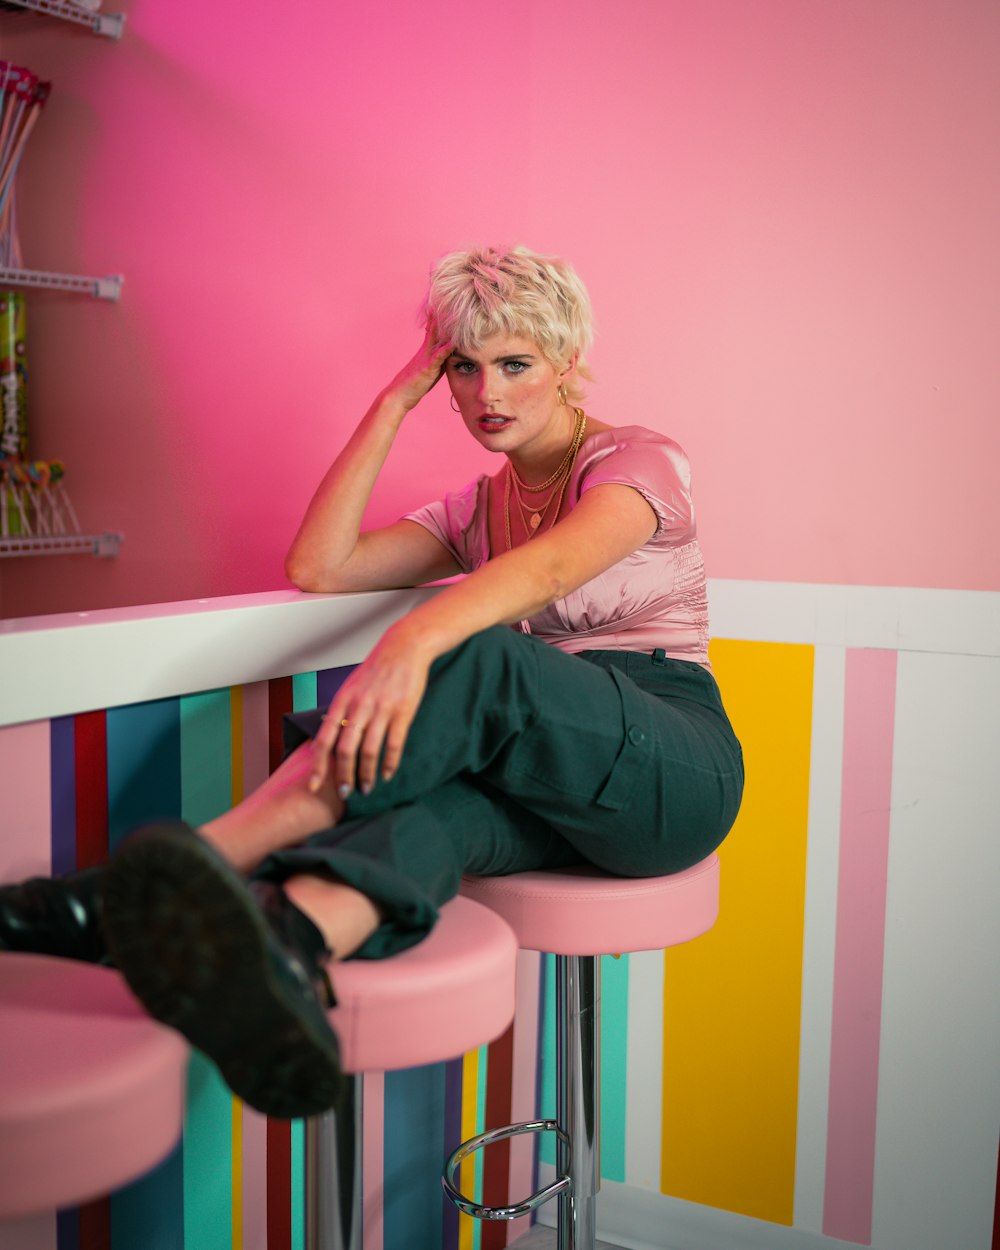 woman in pink shirt and black pants sitting on white and pink wooden chair